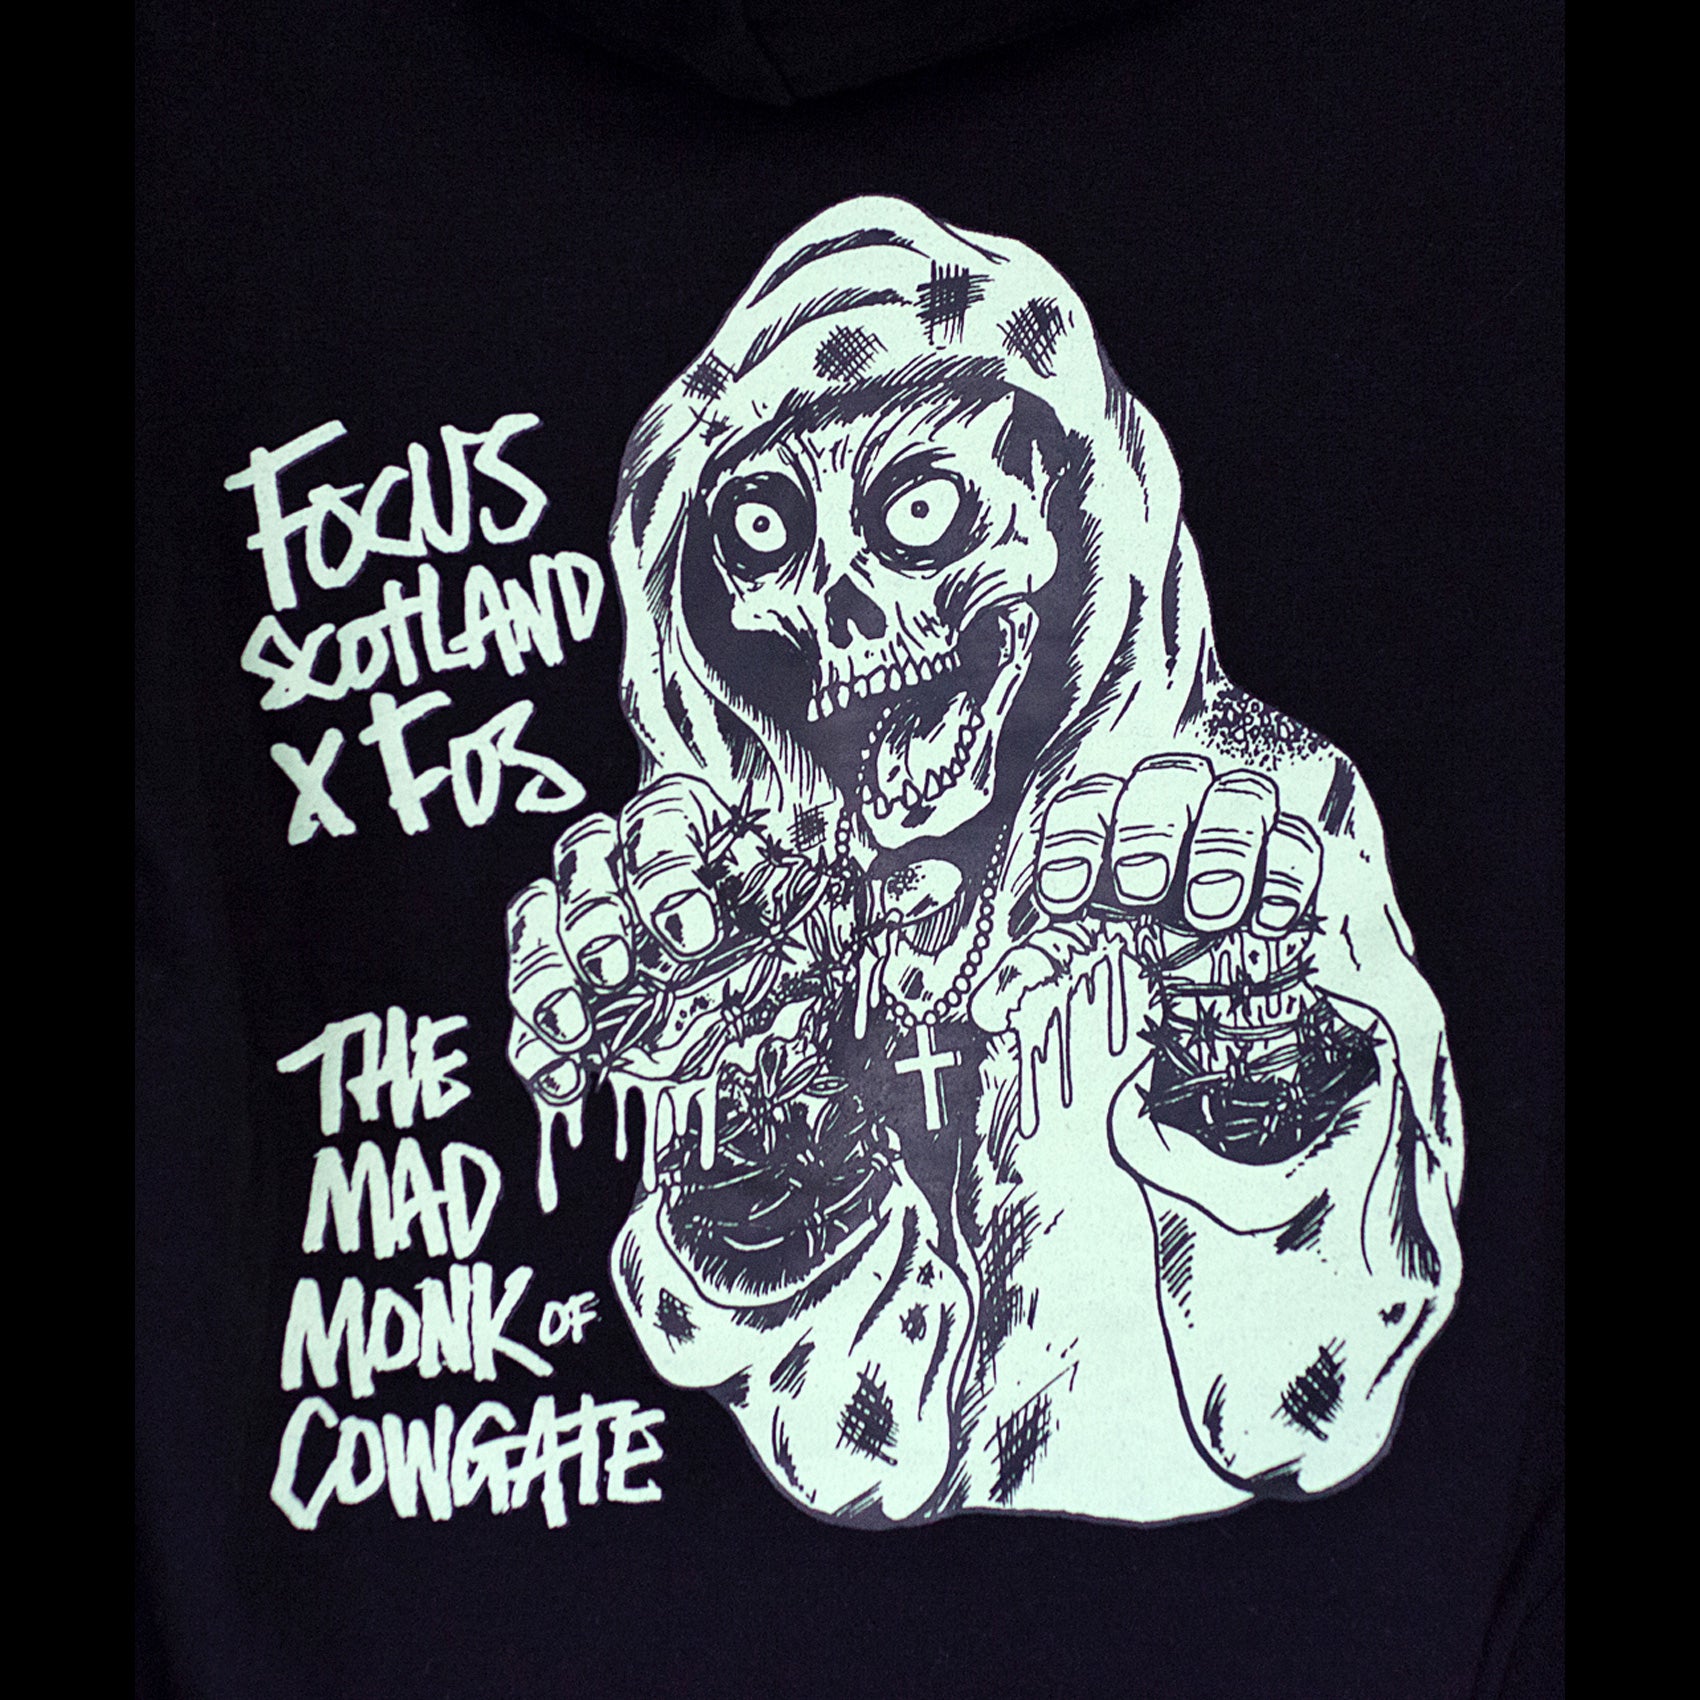 Focus Scotland x Fos Mad Monk Of The Cowgate